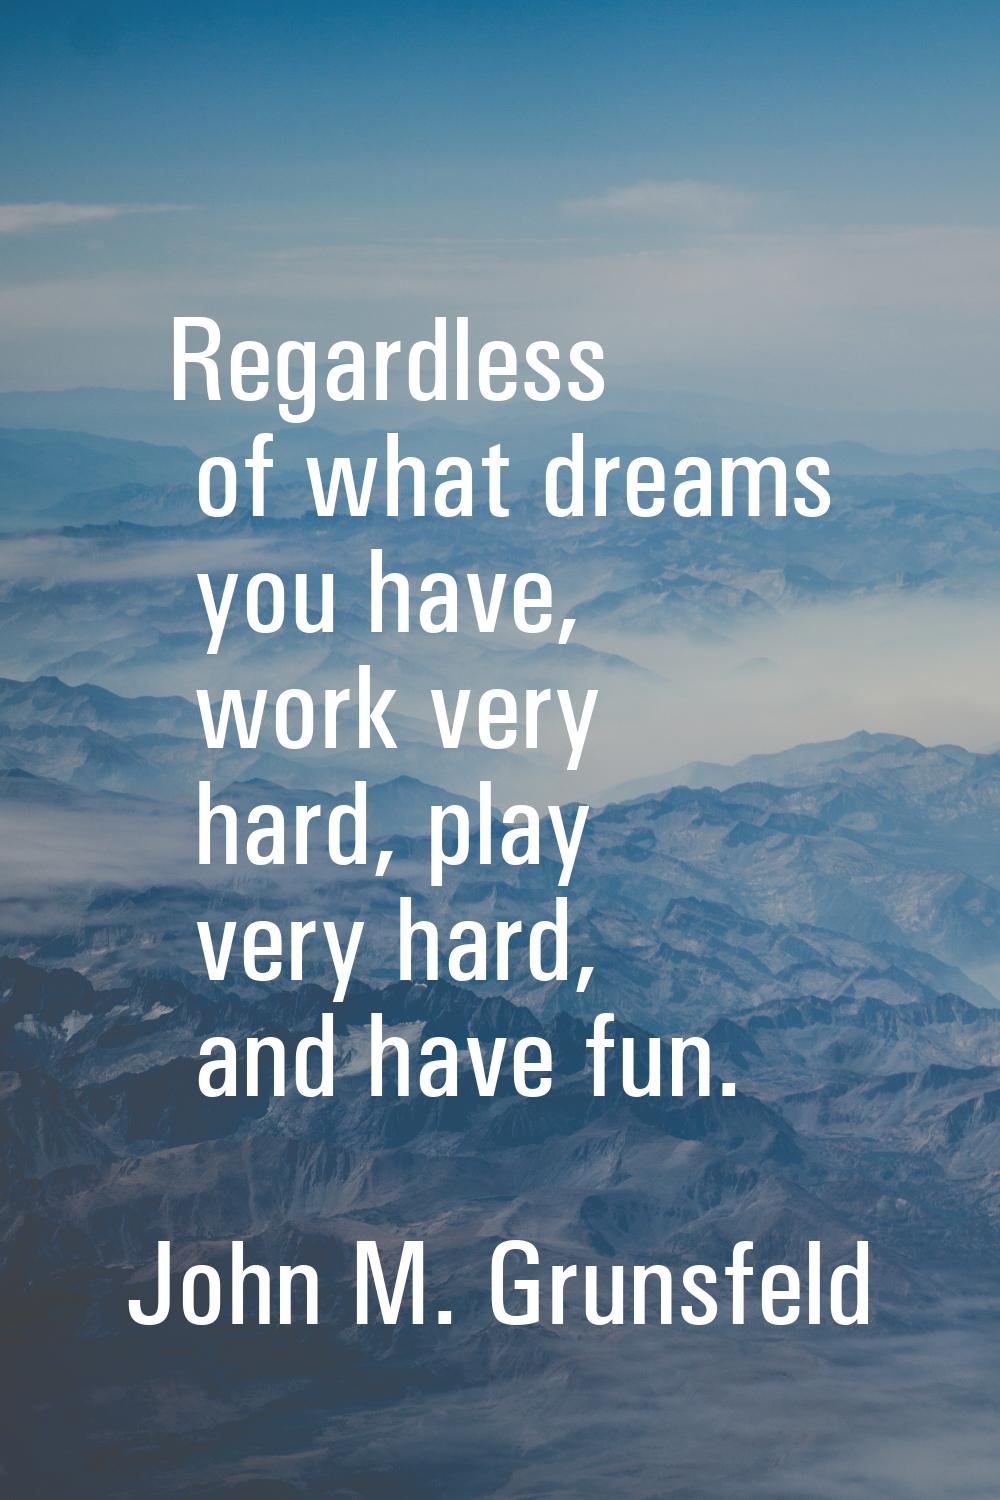 Regardless of what dreams you have, work very hard, play very hard, and have fun.